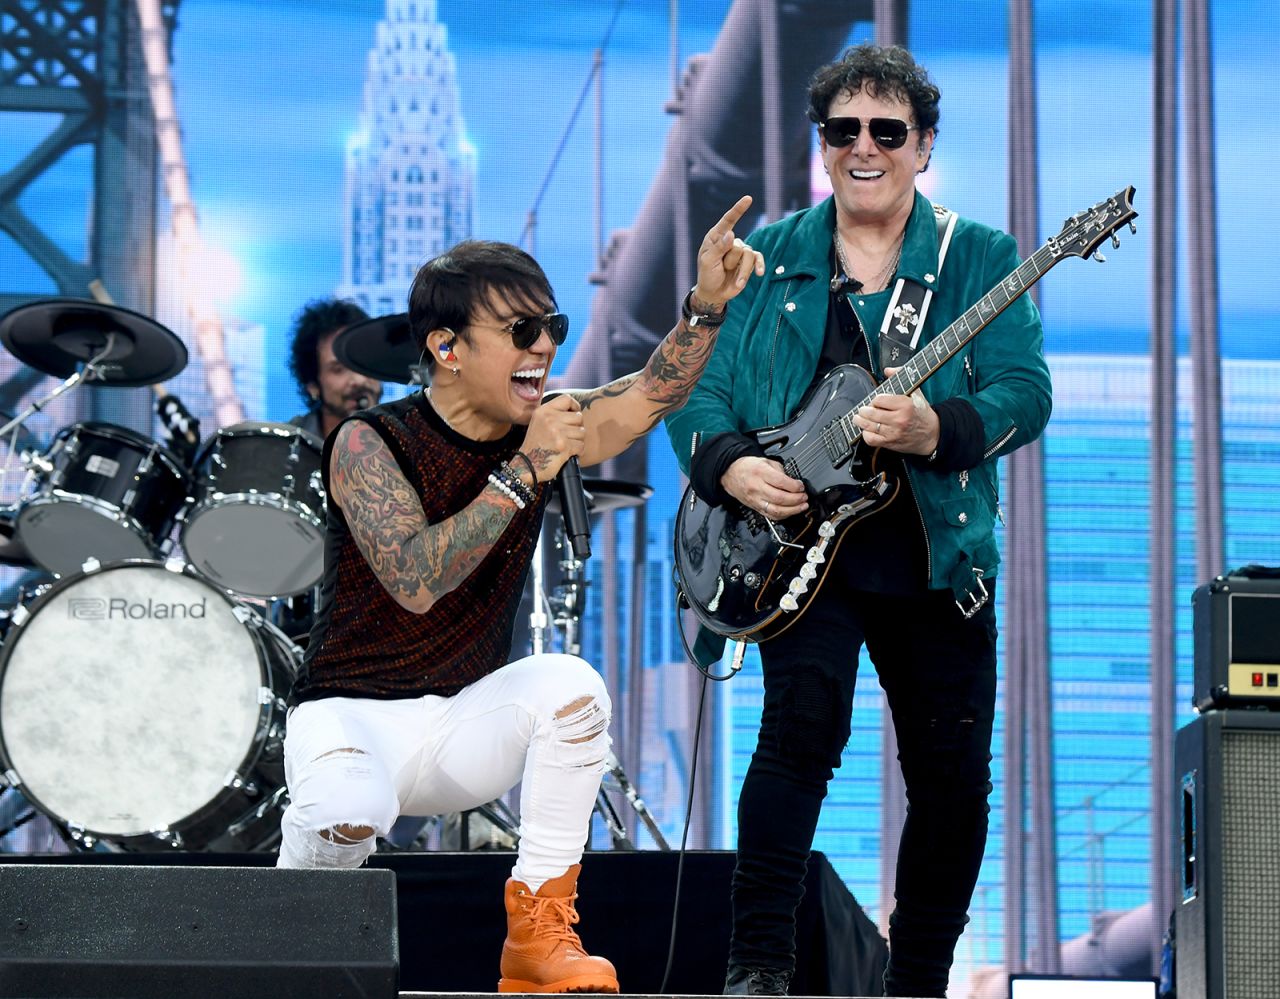 Arnel Pineda and Neal Schon of Journey perform "Don't Stop Believin'."